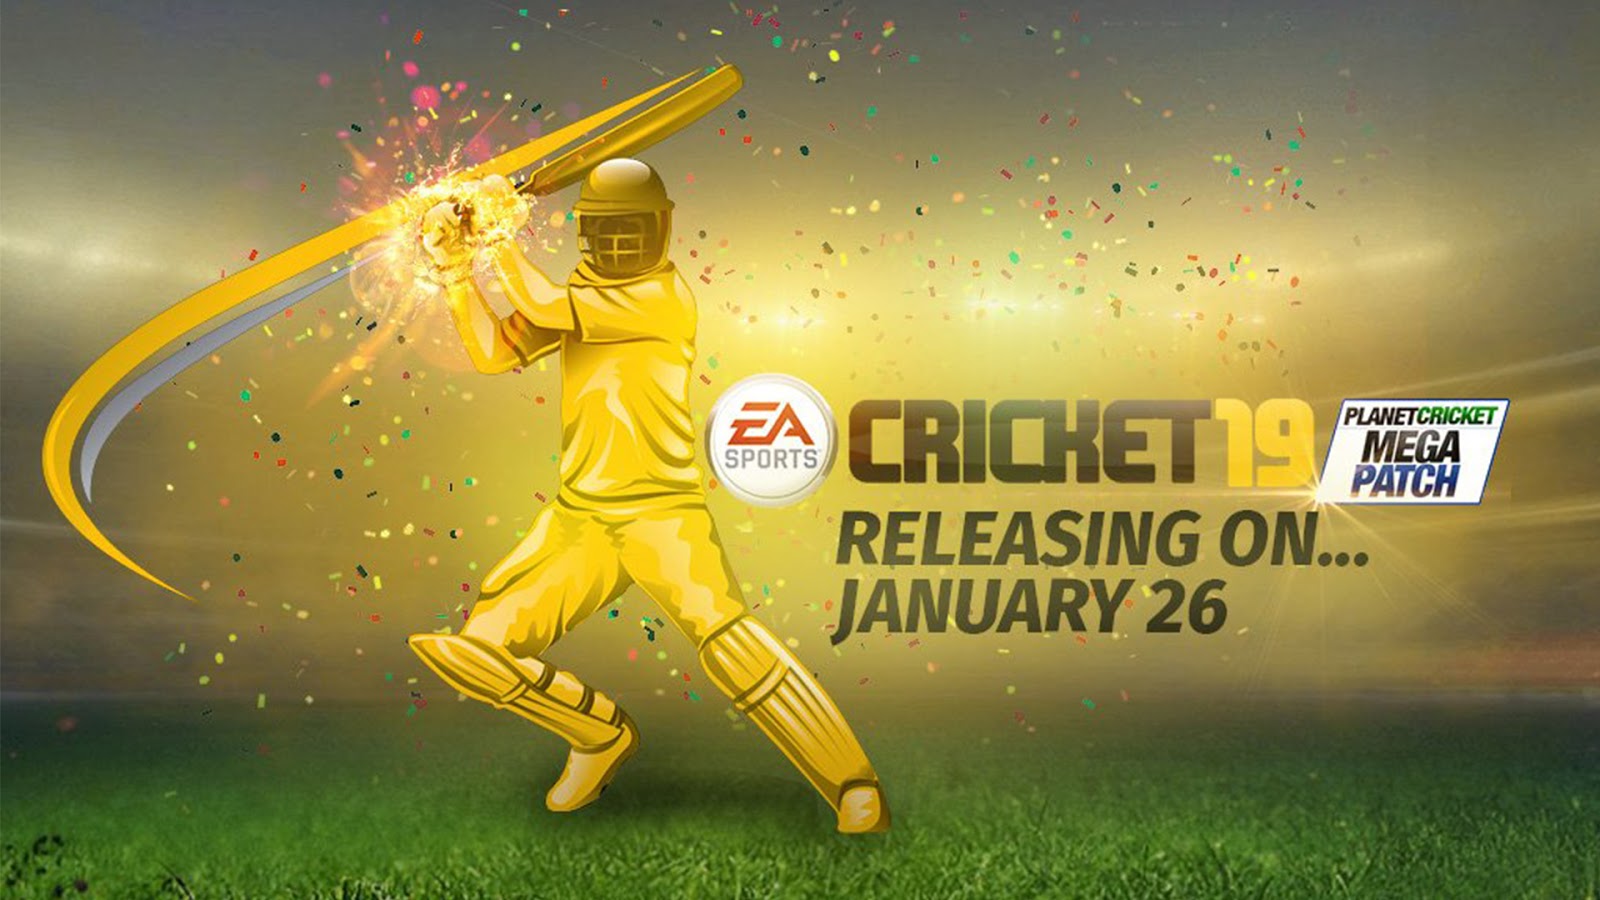 ea cricket game free download full version for pc